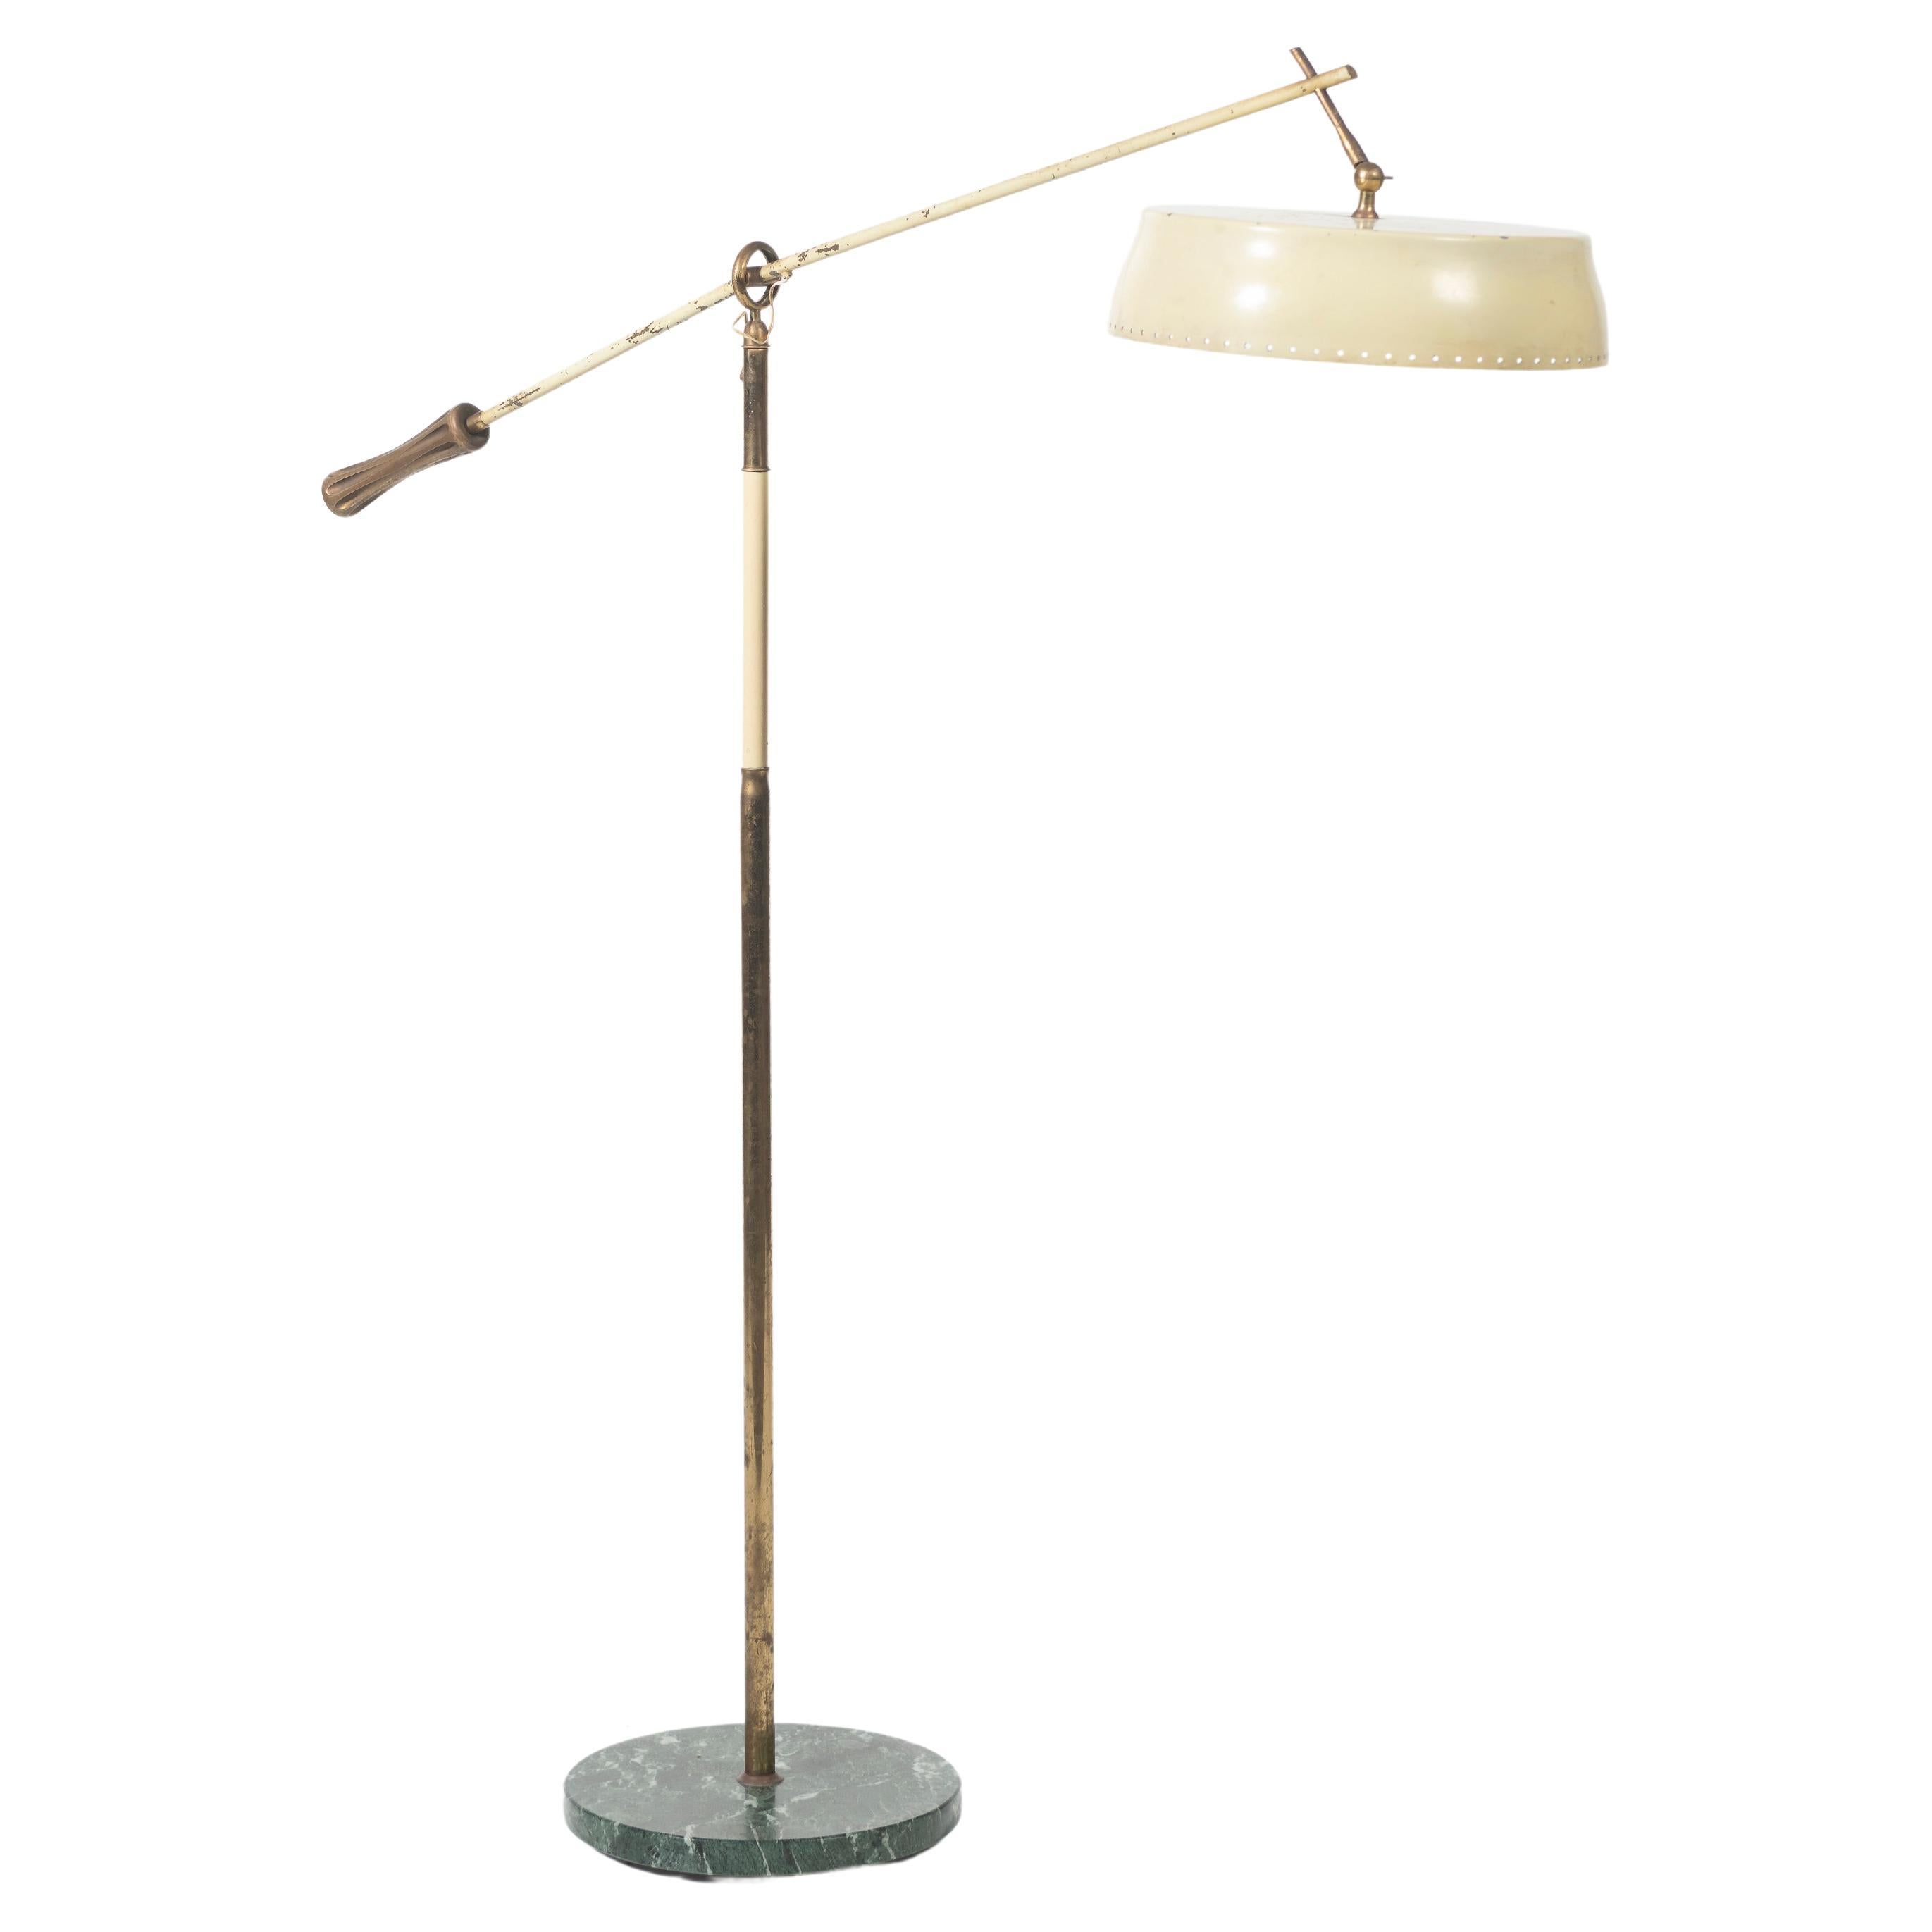 Italian Mid Century Floor Lamp in Brass with Swing Arm and Green Marble Base